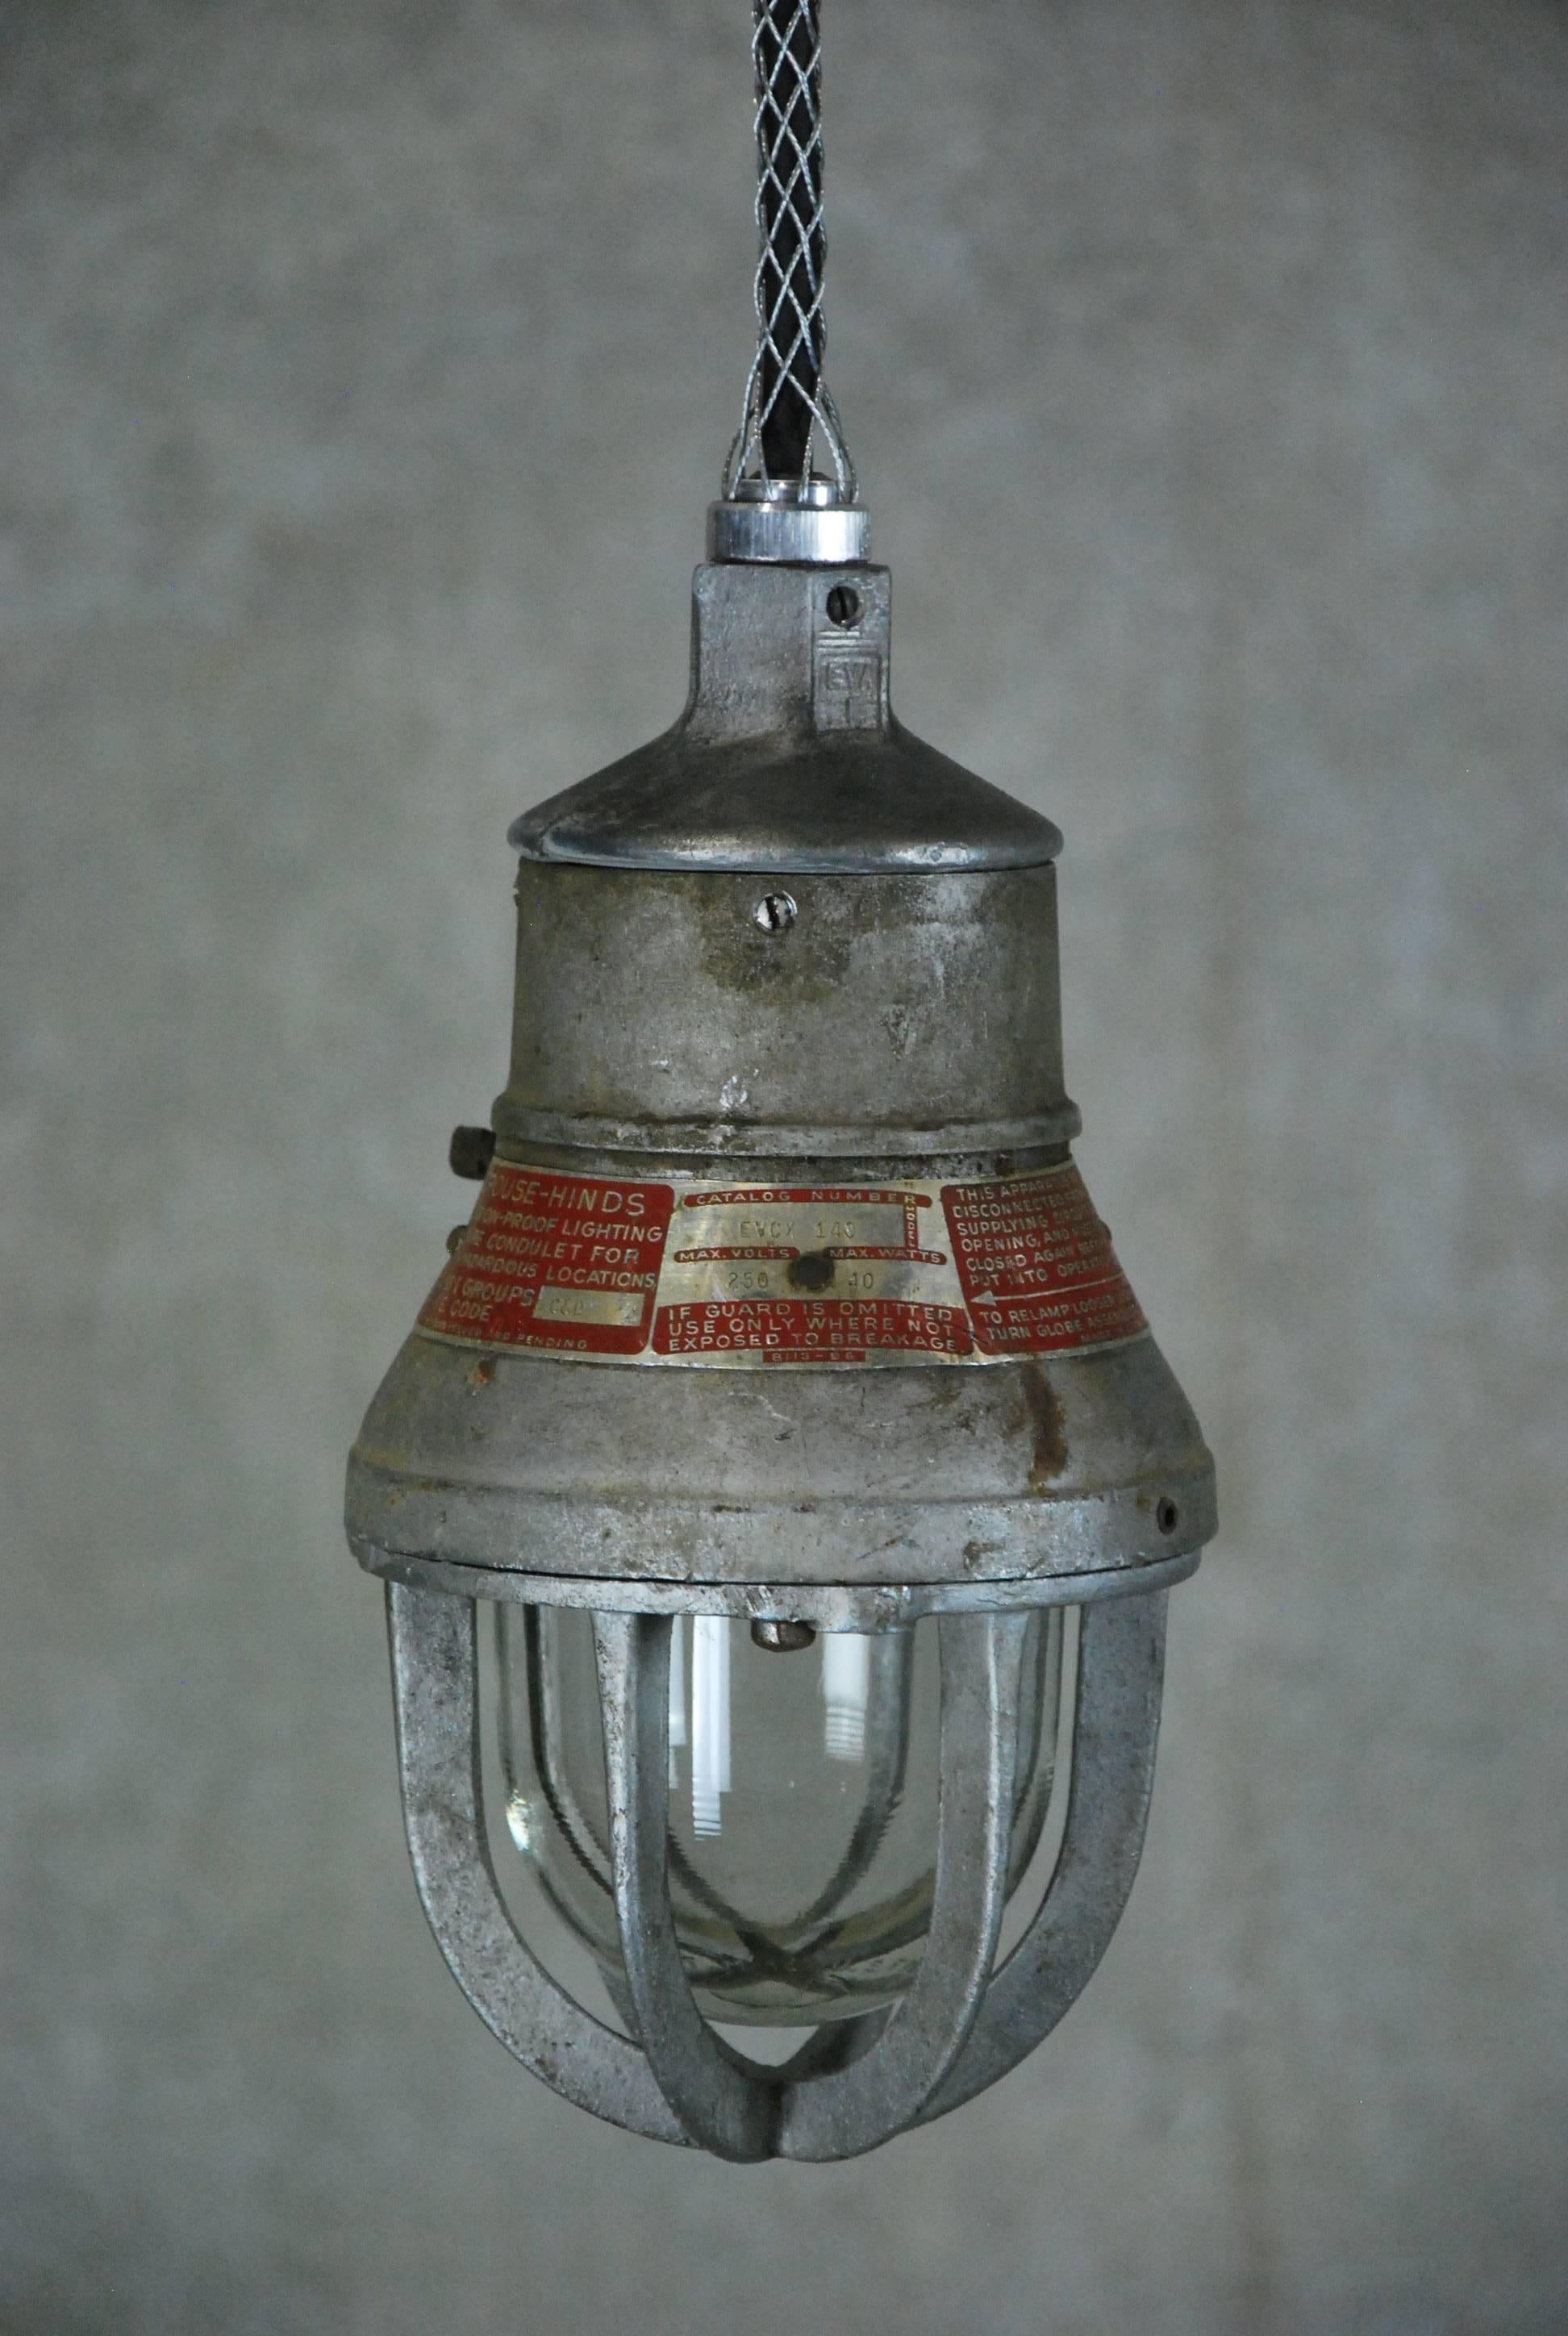 A pair of small Industrial pendants in cast aluminum with protective cage and solid glass insert. We have had many Industrial pendants but have not seen this size ever. Rewired CSA approved and ready for easy install.

in 1897, at age 25,